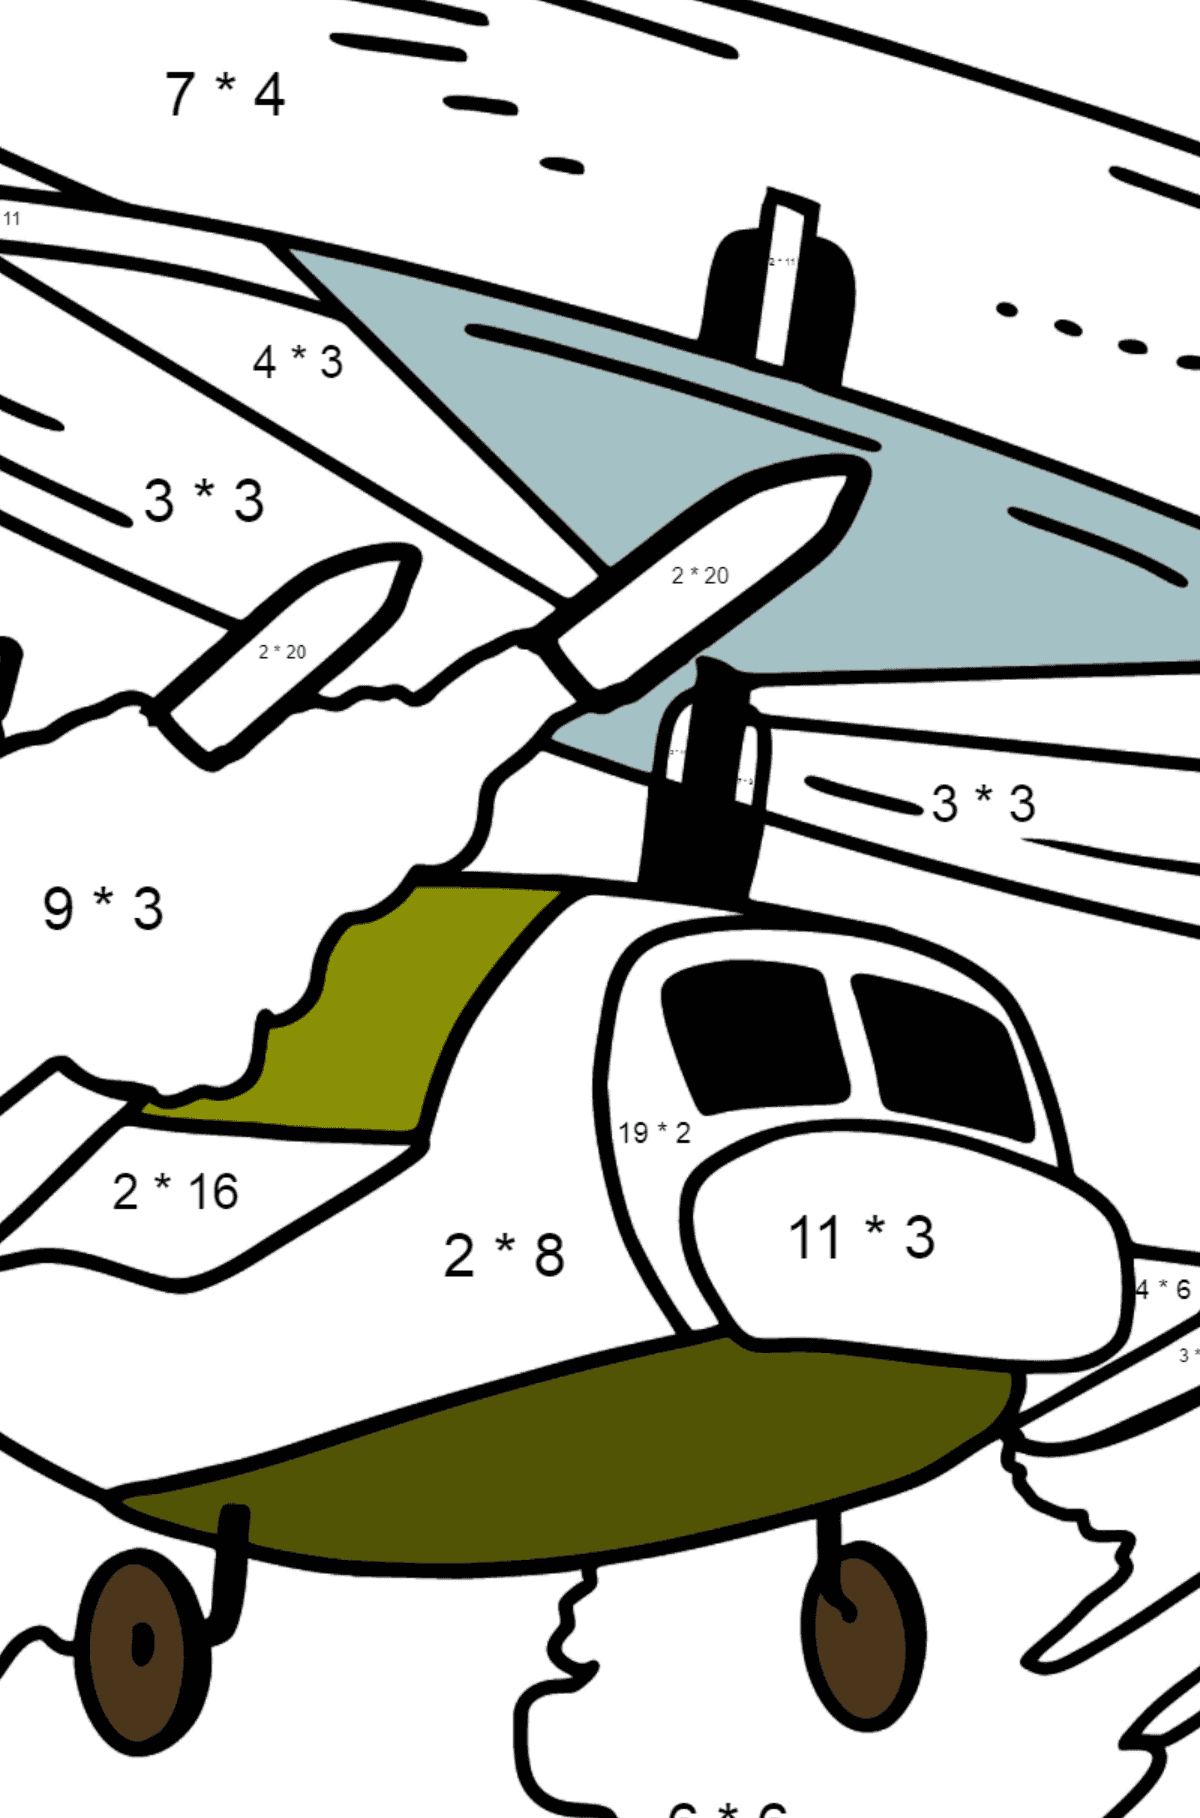 Coloring Page - A Military Helicopter - Math Coloring - Multiplication for Kids